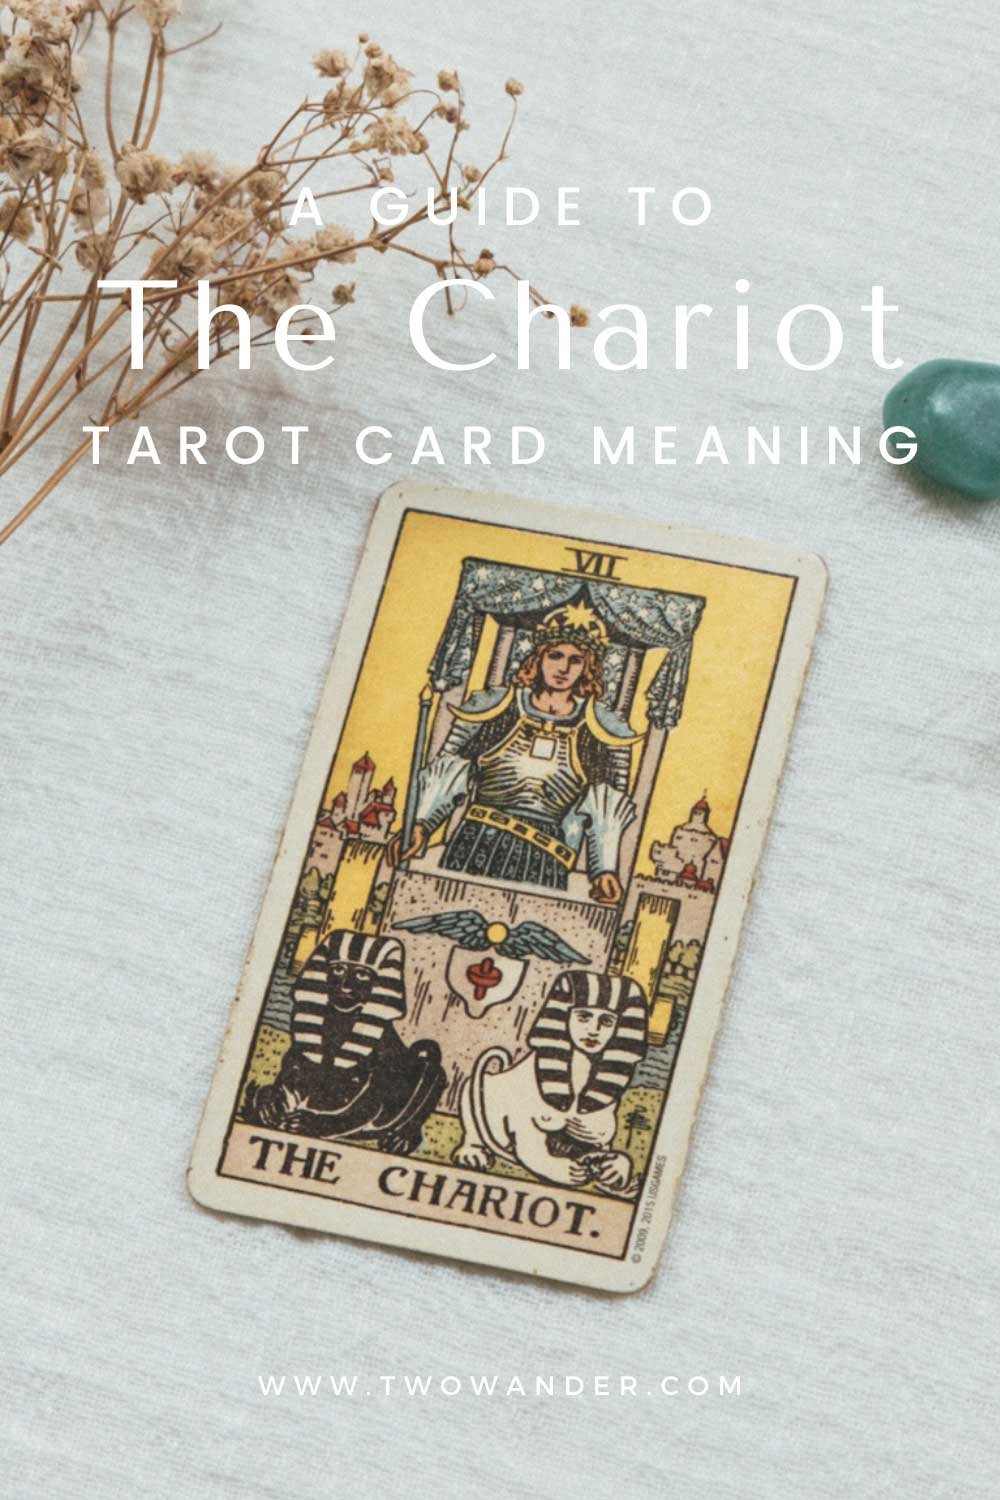 Two Wander - The Chariot Tarot Card Meaning